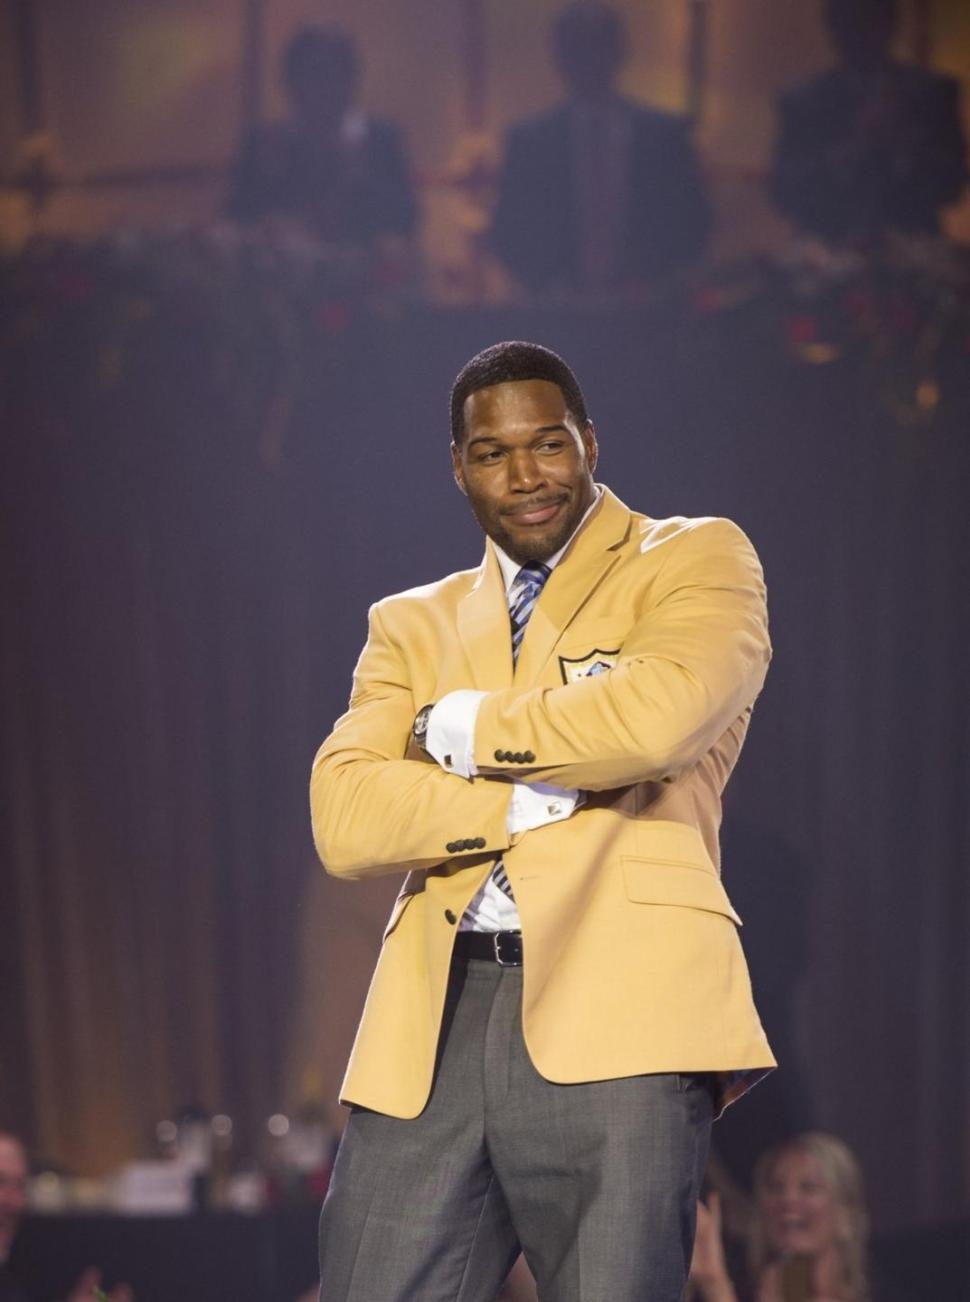 Michael Strahan says he’s always wanted to be married, but gold-diggers are a deal-breaker